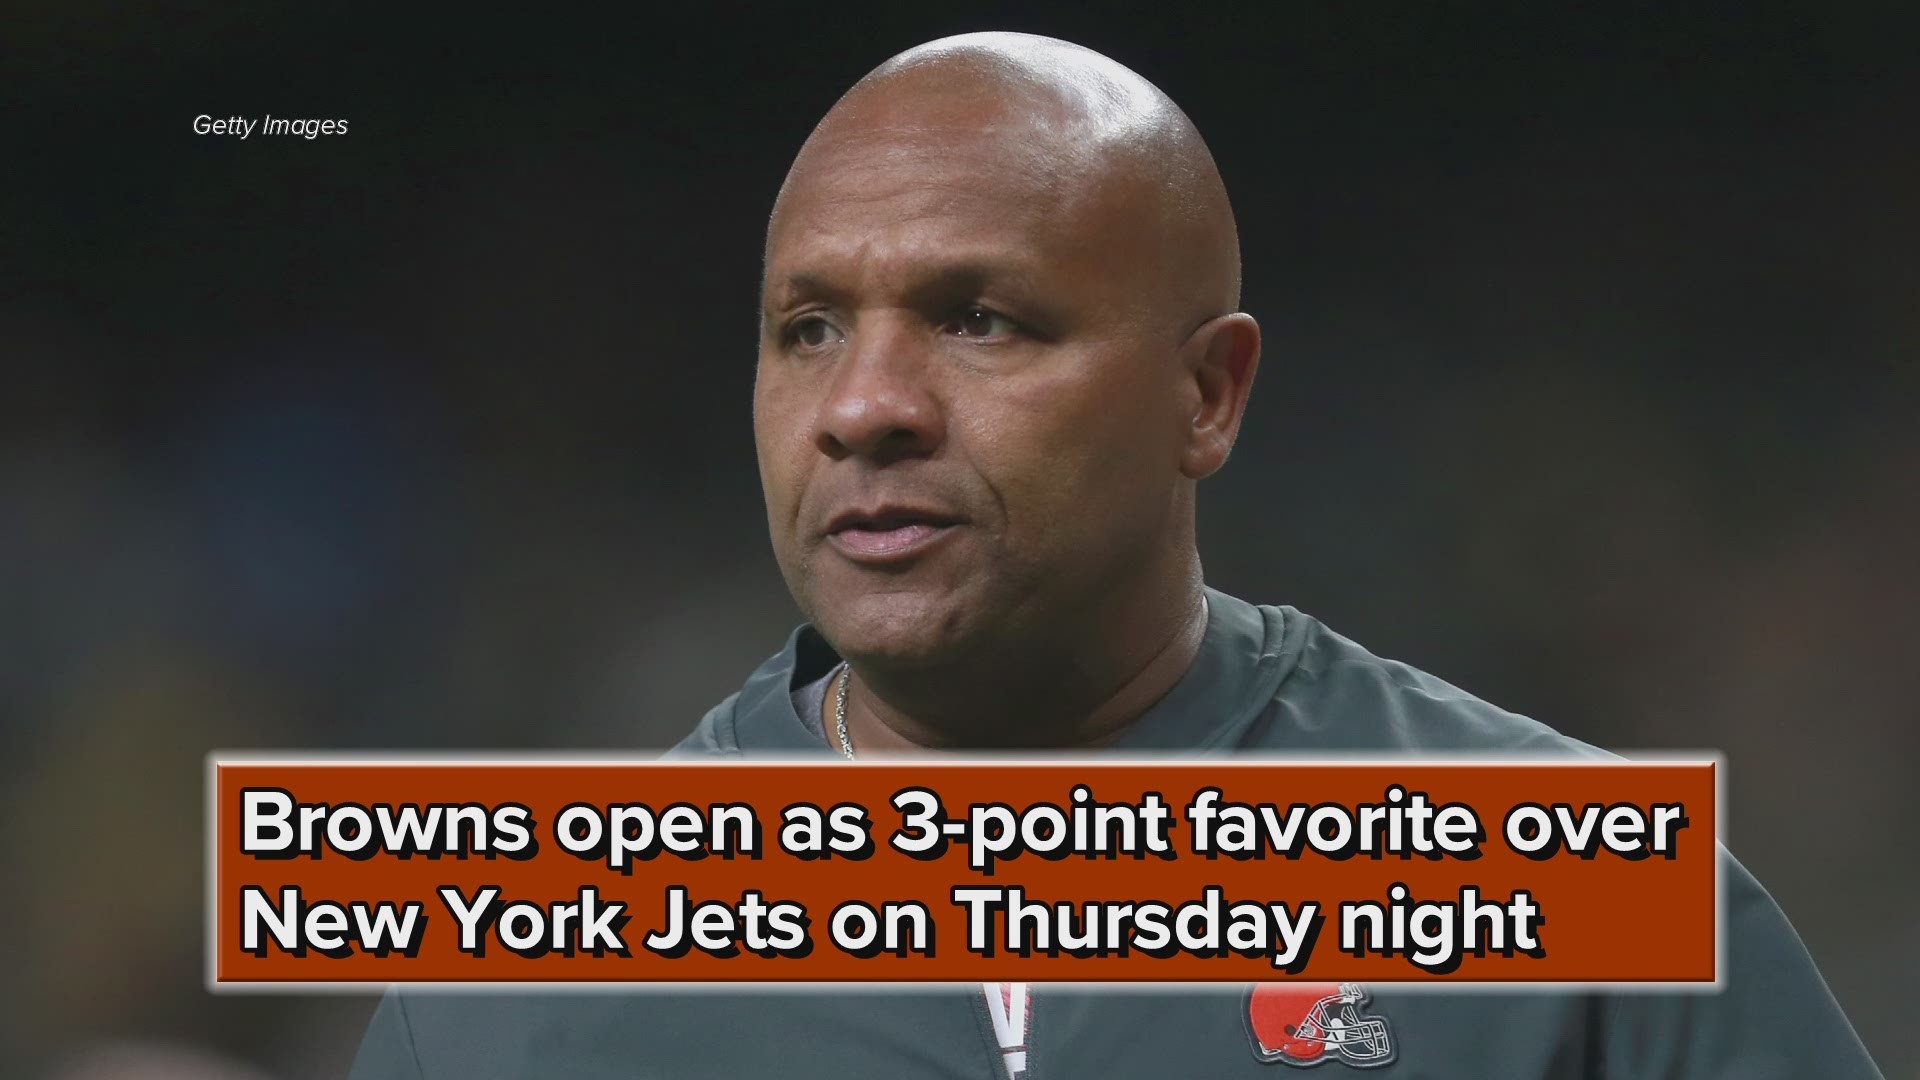 Cleveland Browns open as 3-point favorite over New York Jets